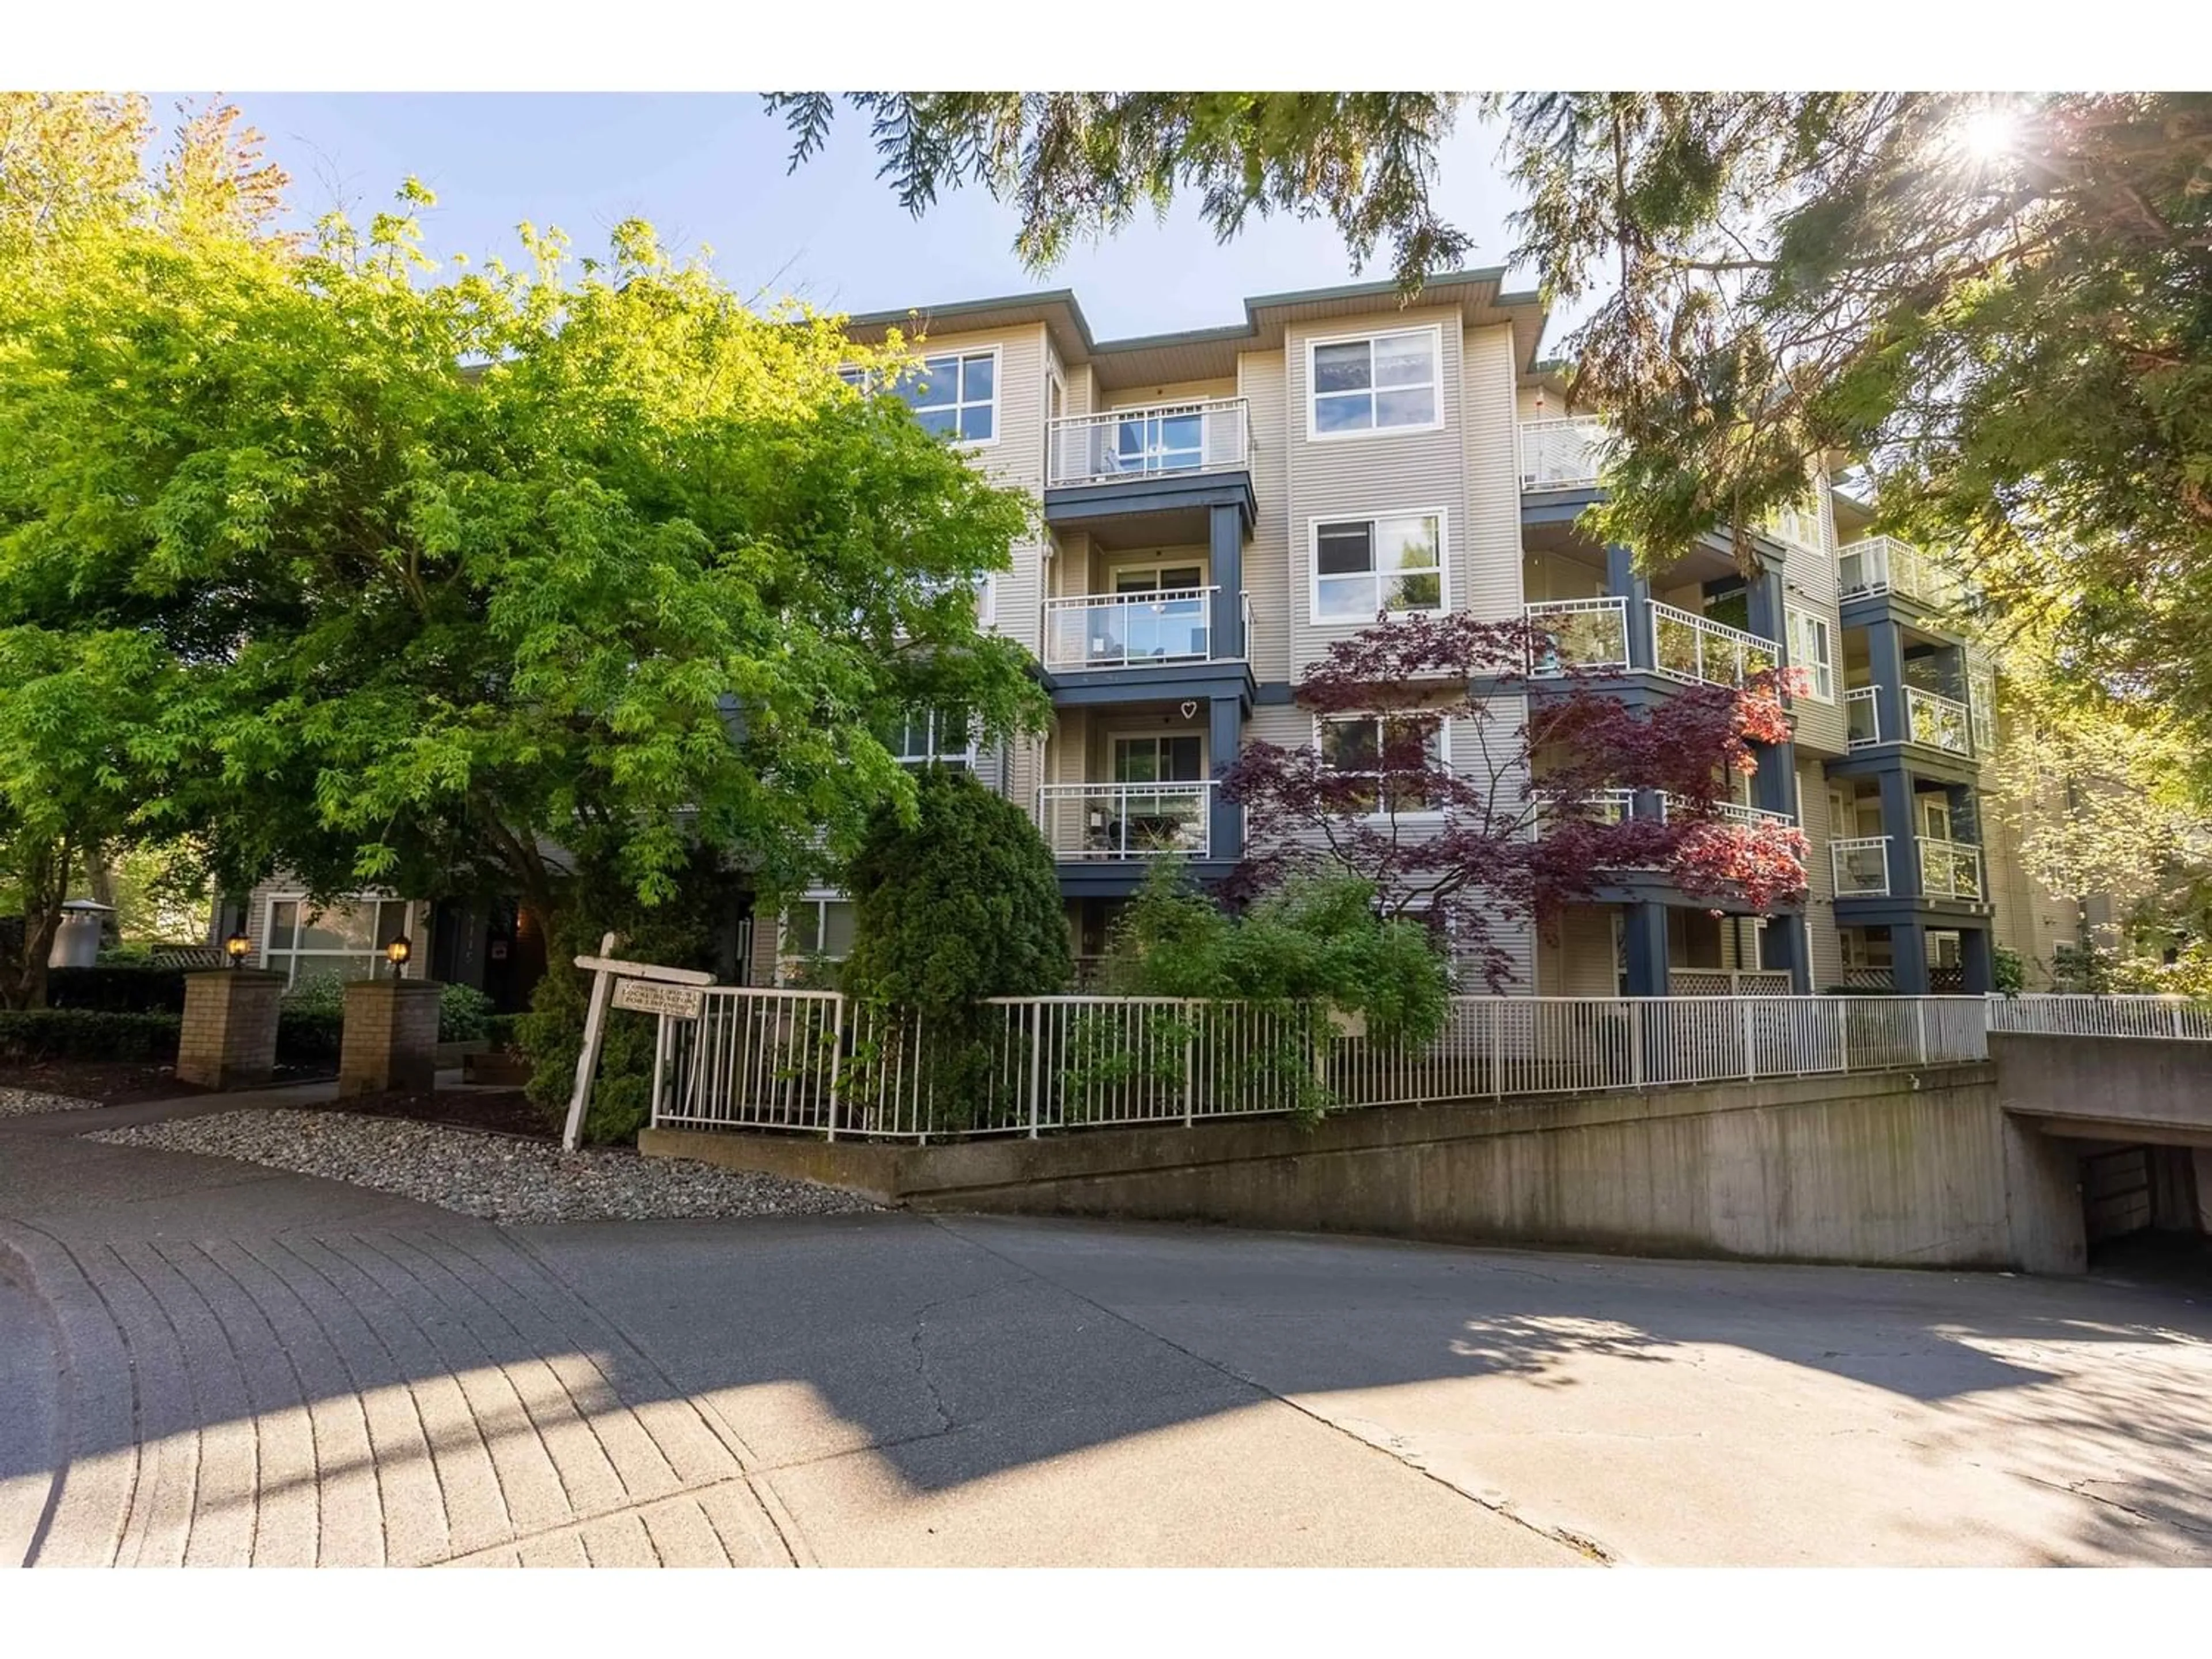 A pic from exterior of the house or condo for 307 8115 121A STREET, Surrey British Columbia V3W1J2